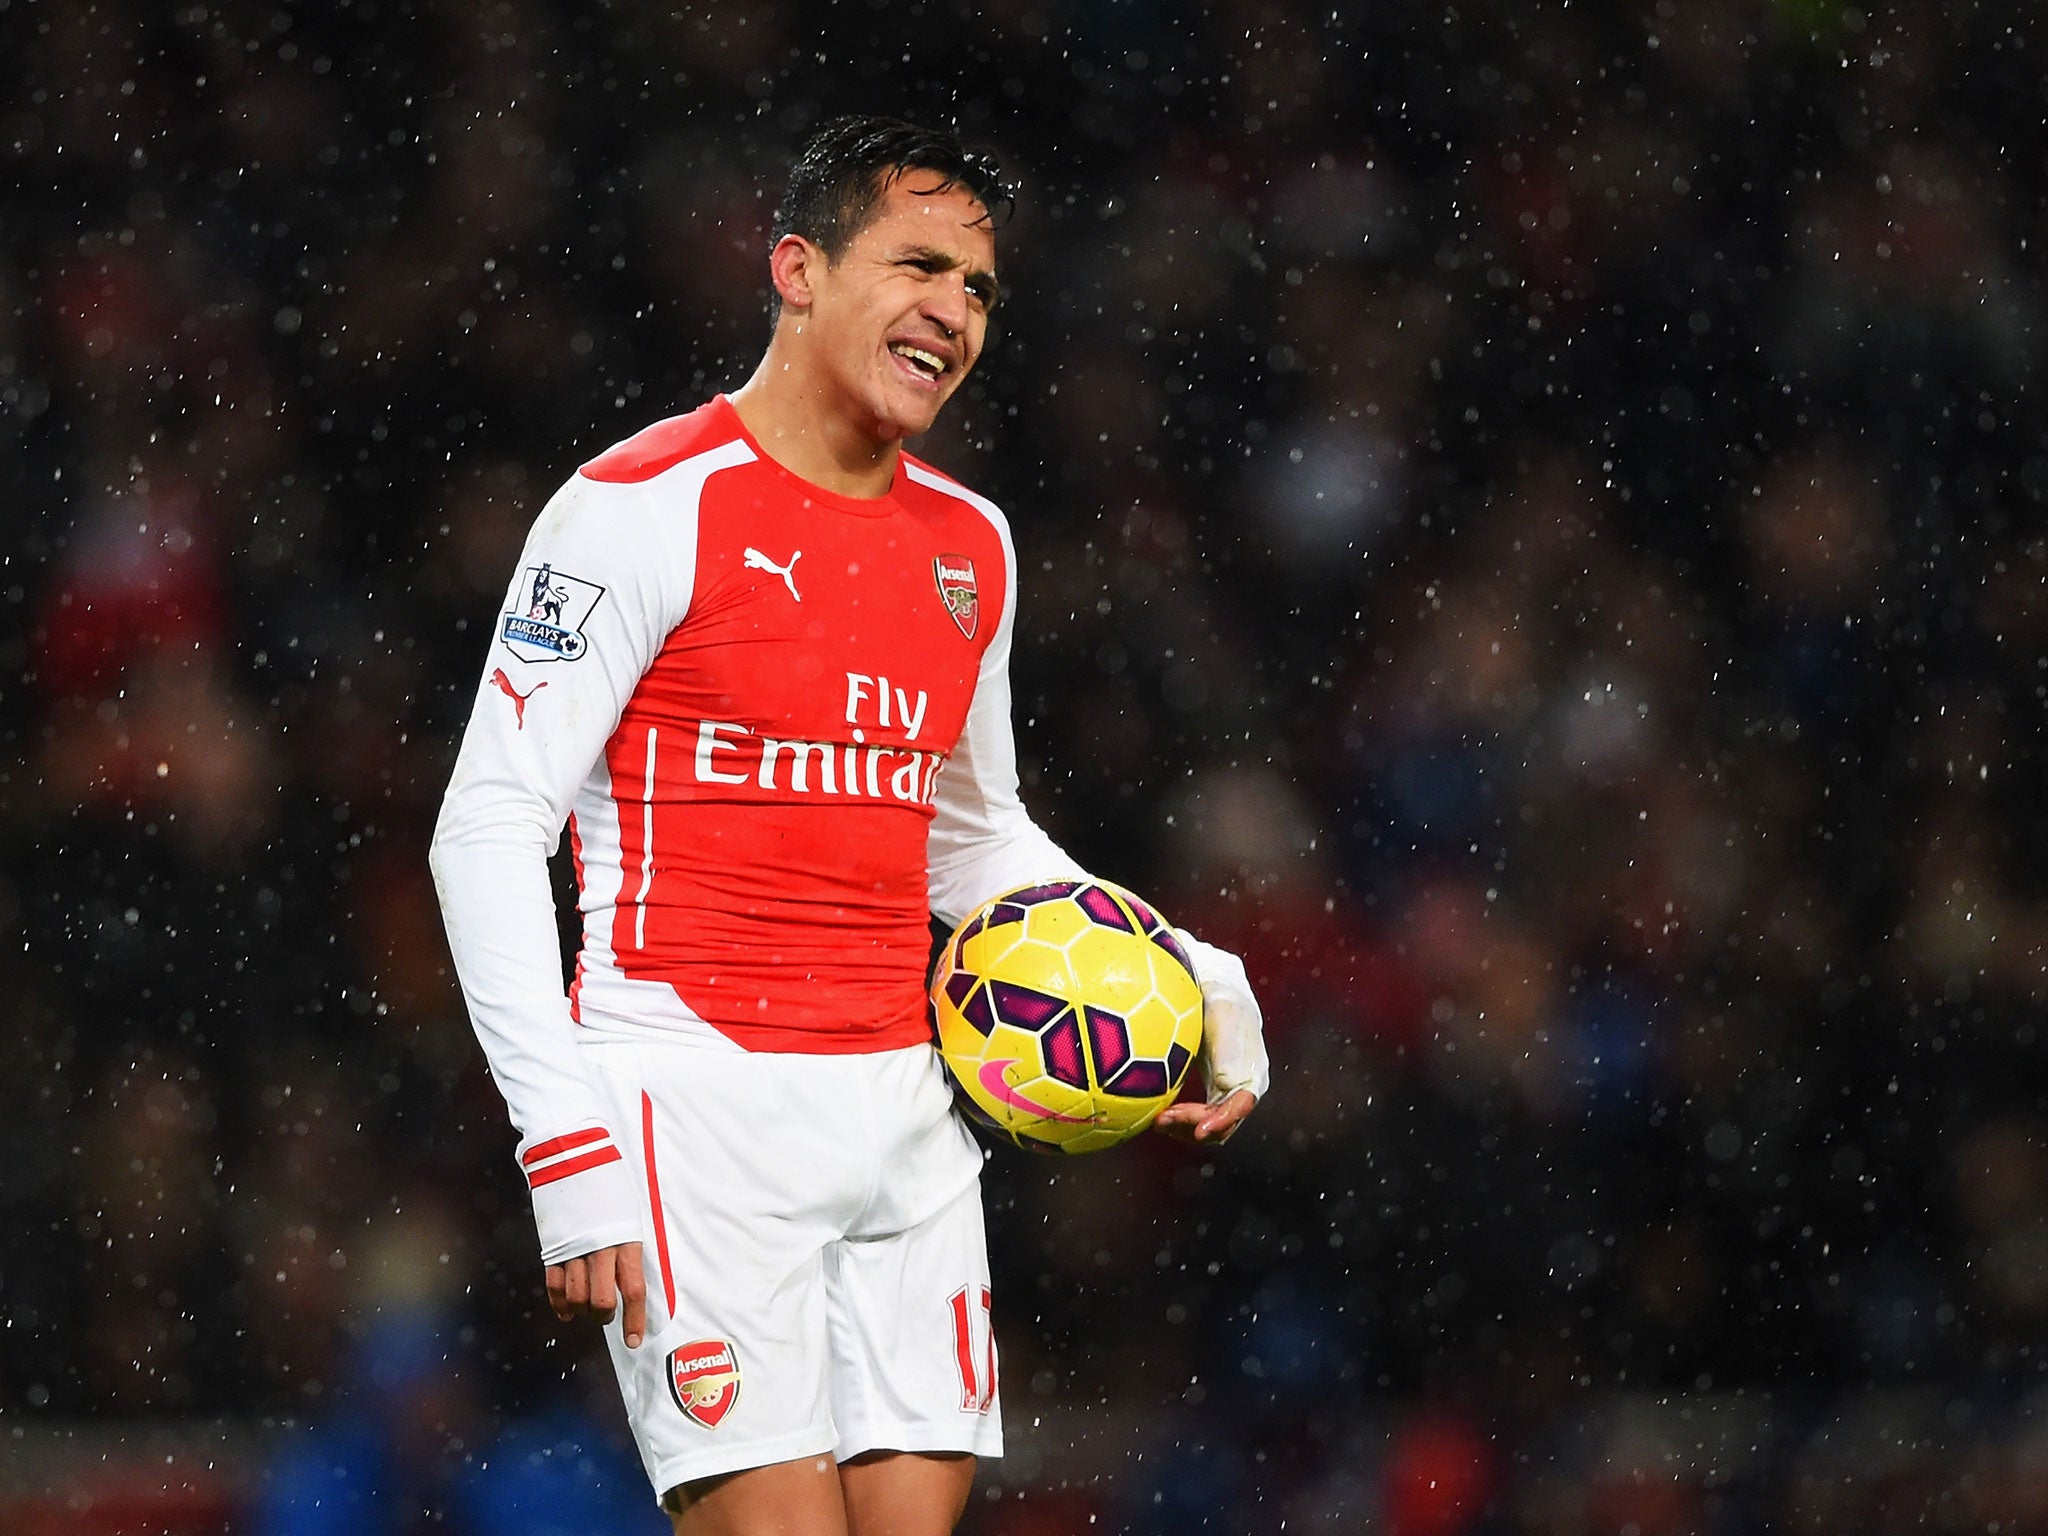 Alexis Sanchez missed a penalty before scoring the opening goal with a header